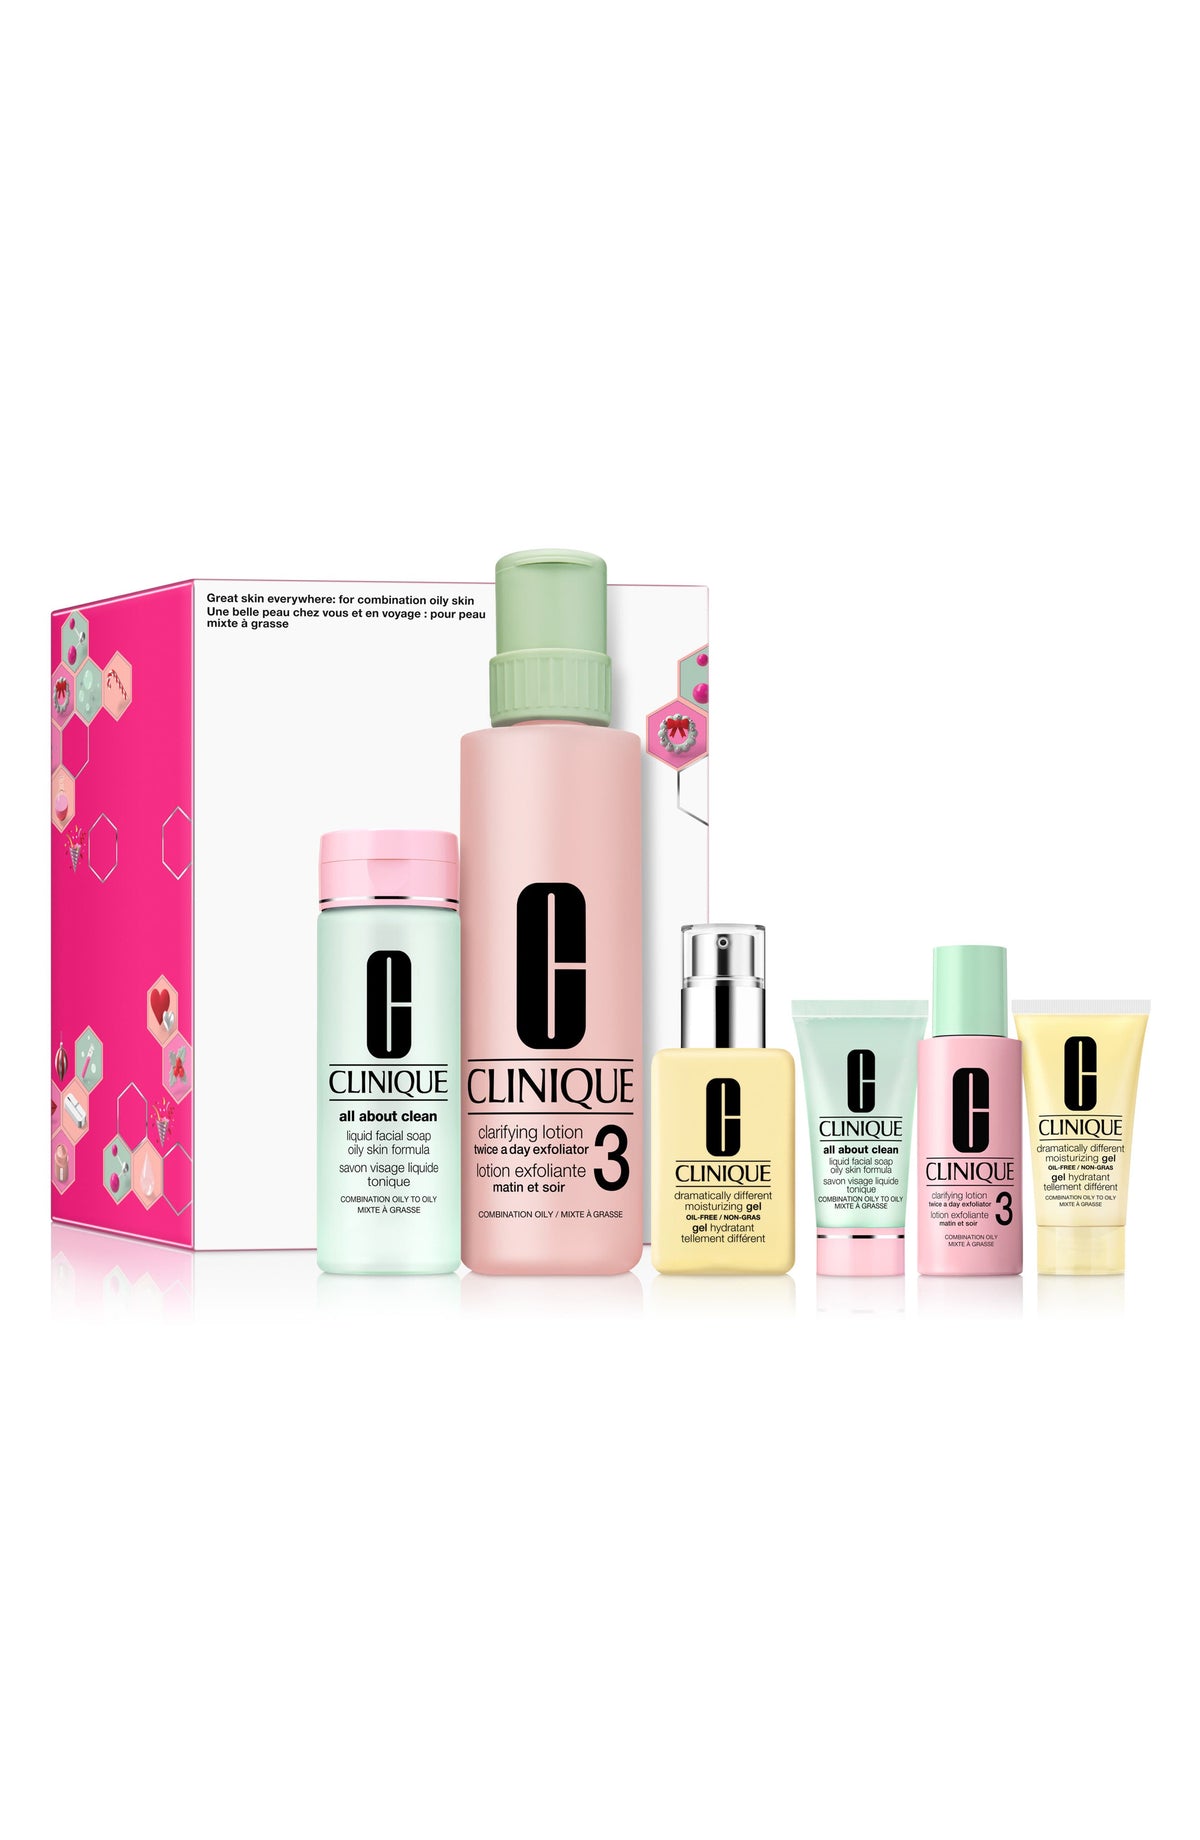 Clinique Great Skin Everywhere Set: For Combination Oily Skin (Value $107.50)